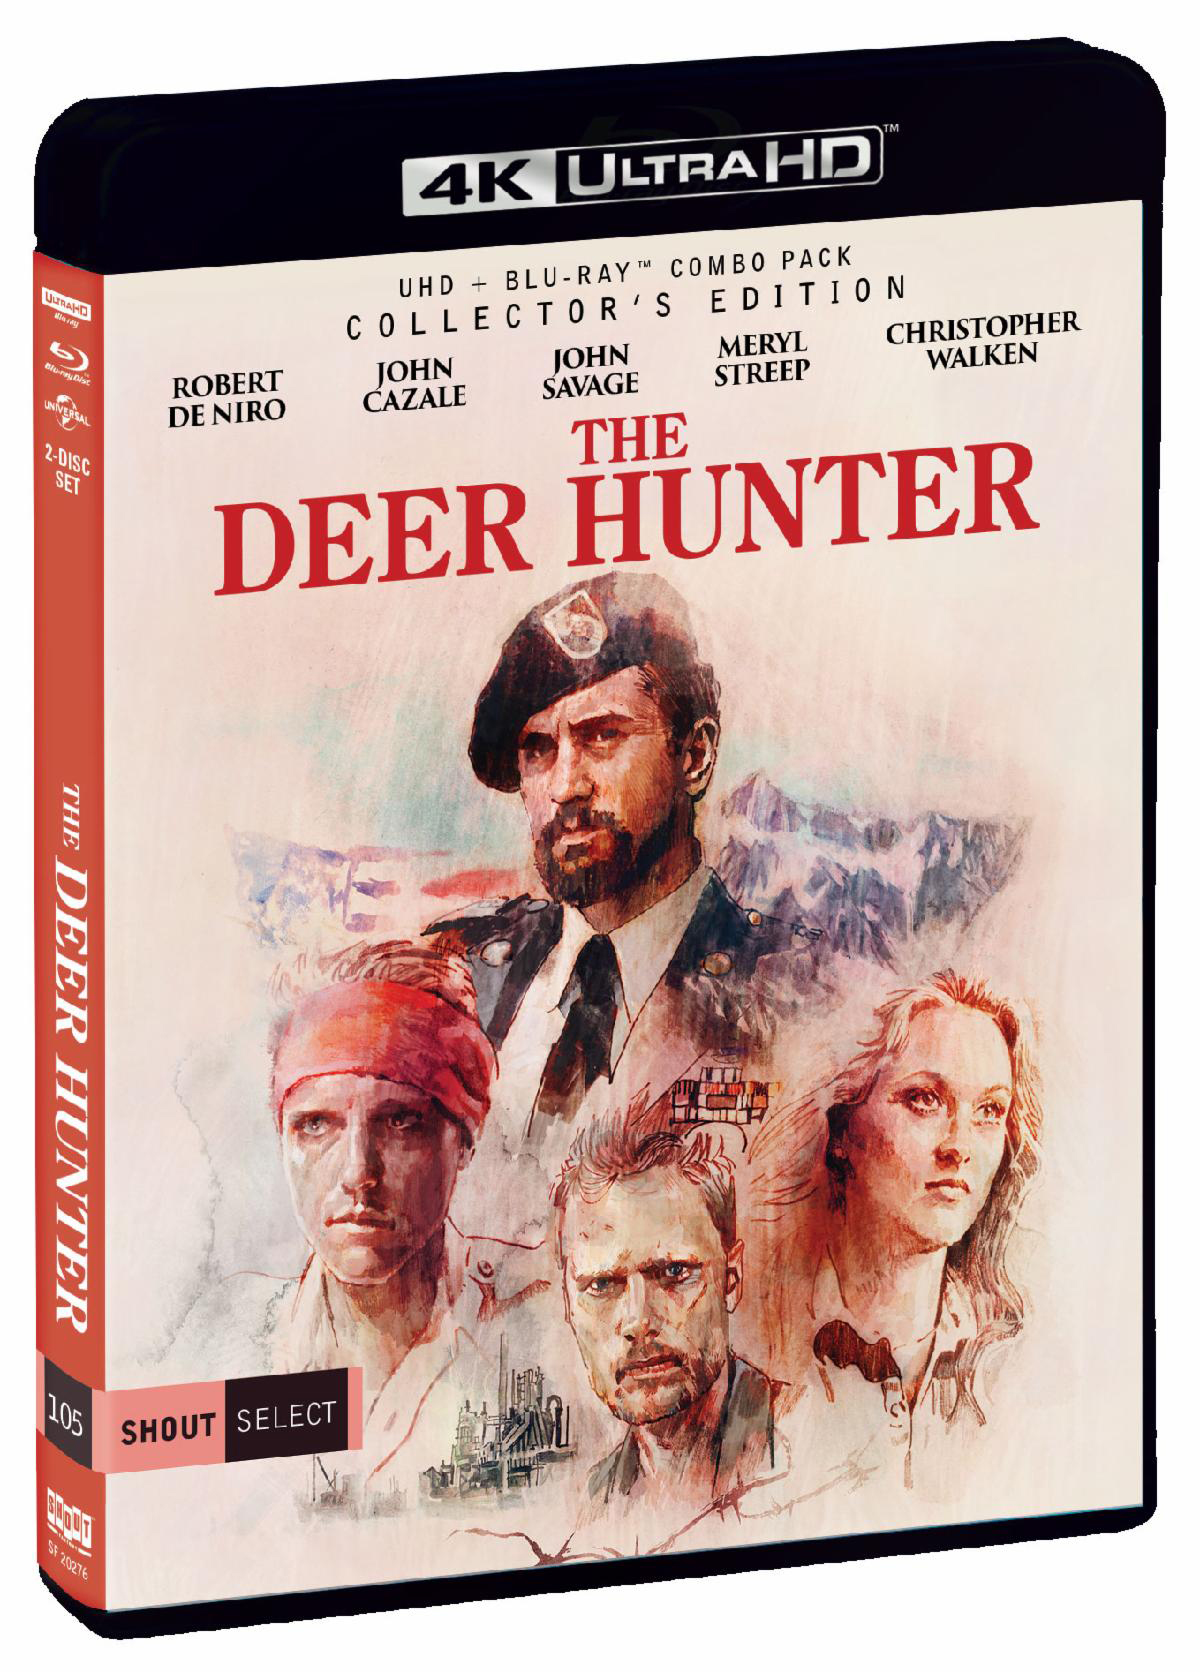 The Deer Hunter - 4K UHD  Collector's Edition